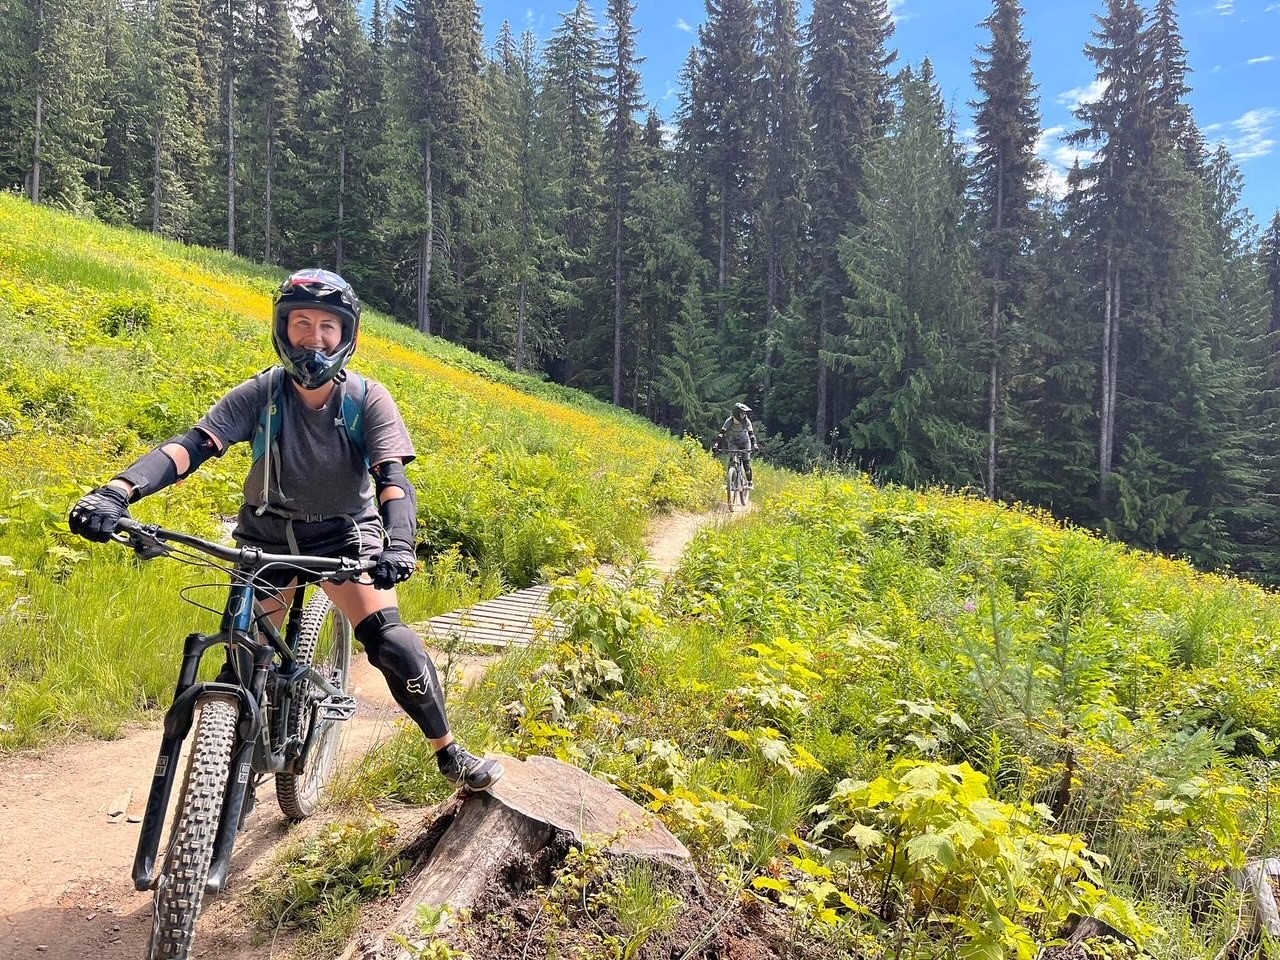 Woman sits on mountain bike, wearing knee pads, arm pads, gloves, and a full helmet. She is on a mountainside covered in greenery and yellow flowers, with evergreen trees in the background. Another cyclist is in the background further down the trail.